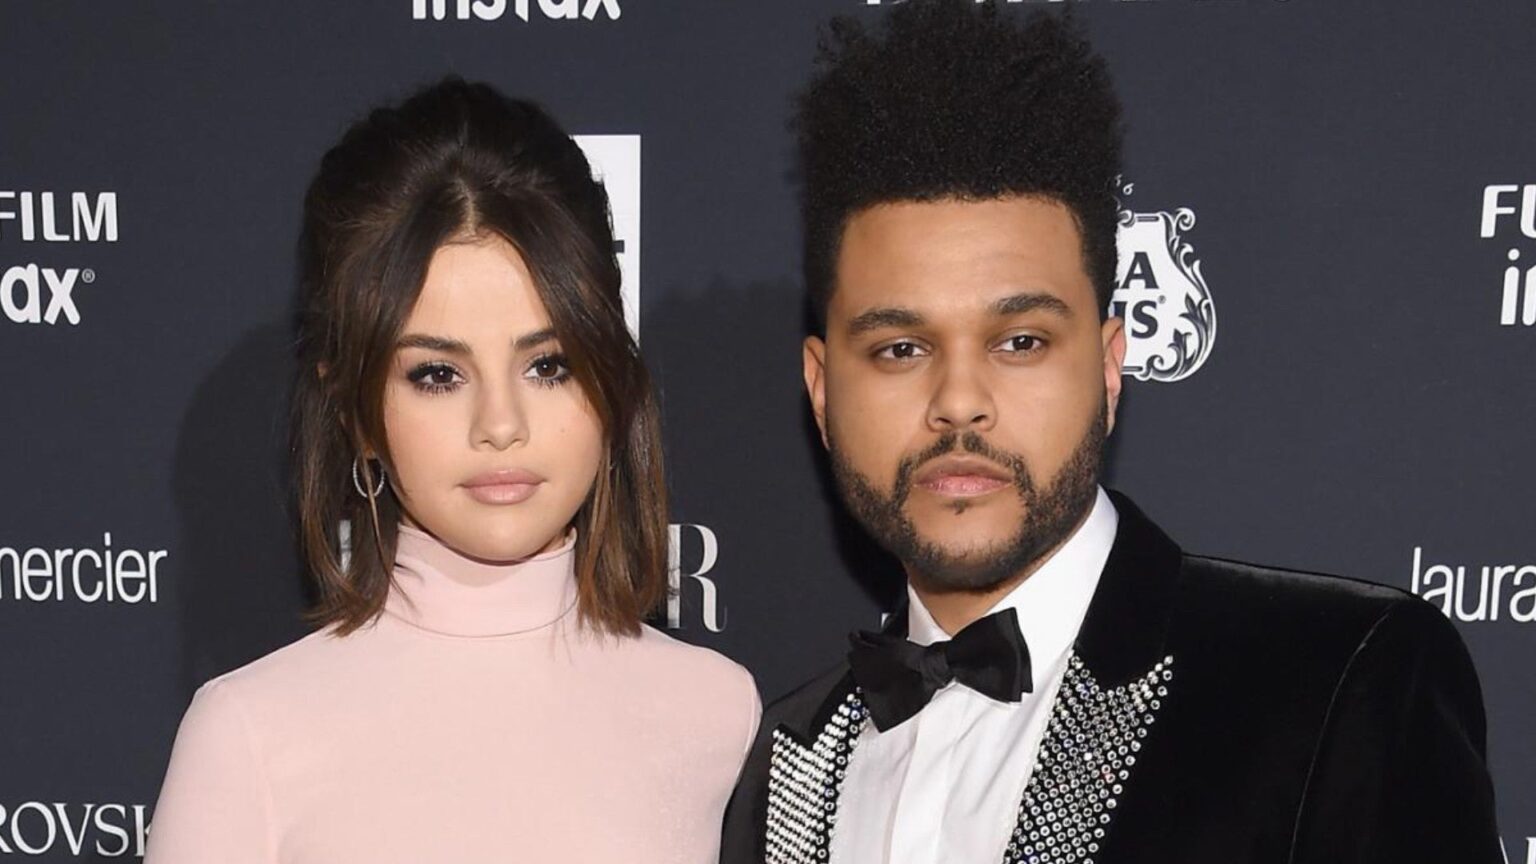 Fans believe that The Weeknd may not be over ex-girlfriend Selena Gomez. Check out how his new music video may give clues that confirm fans' theories.